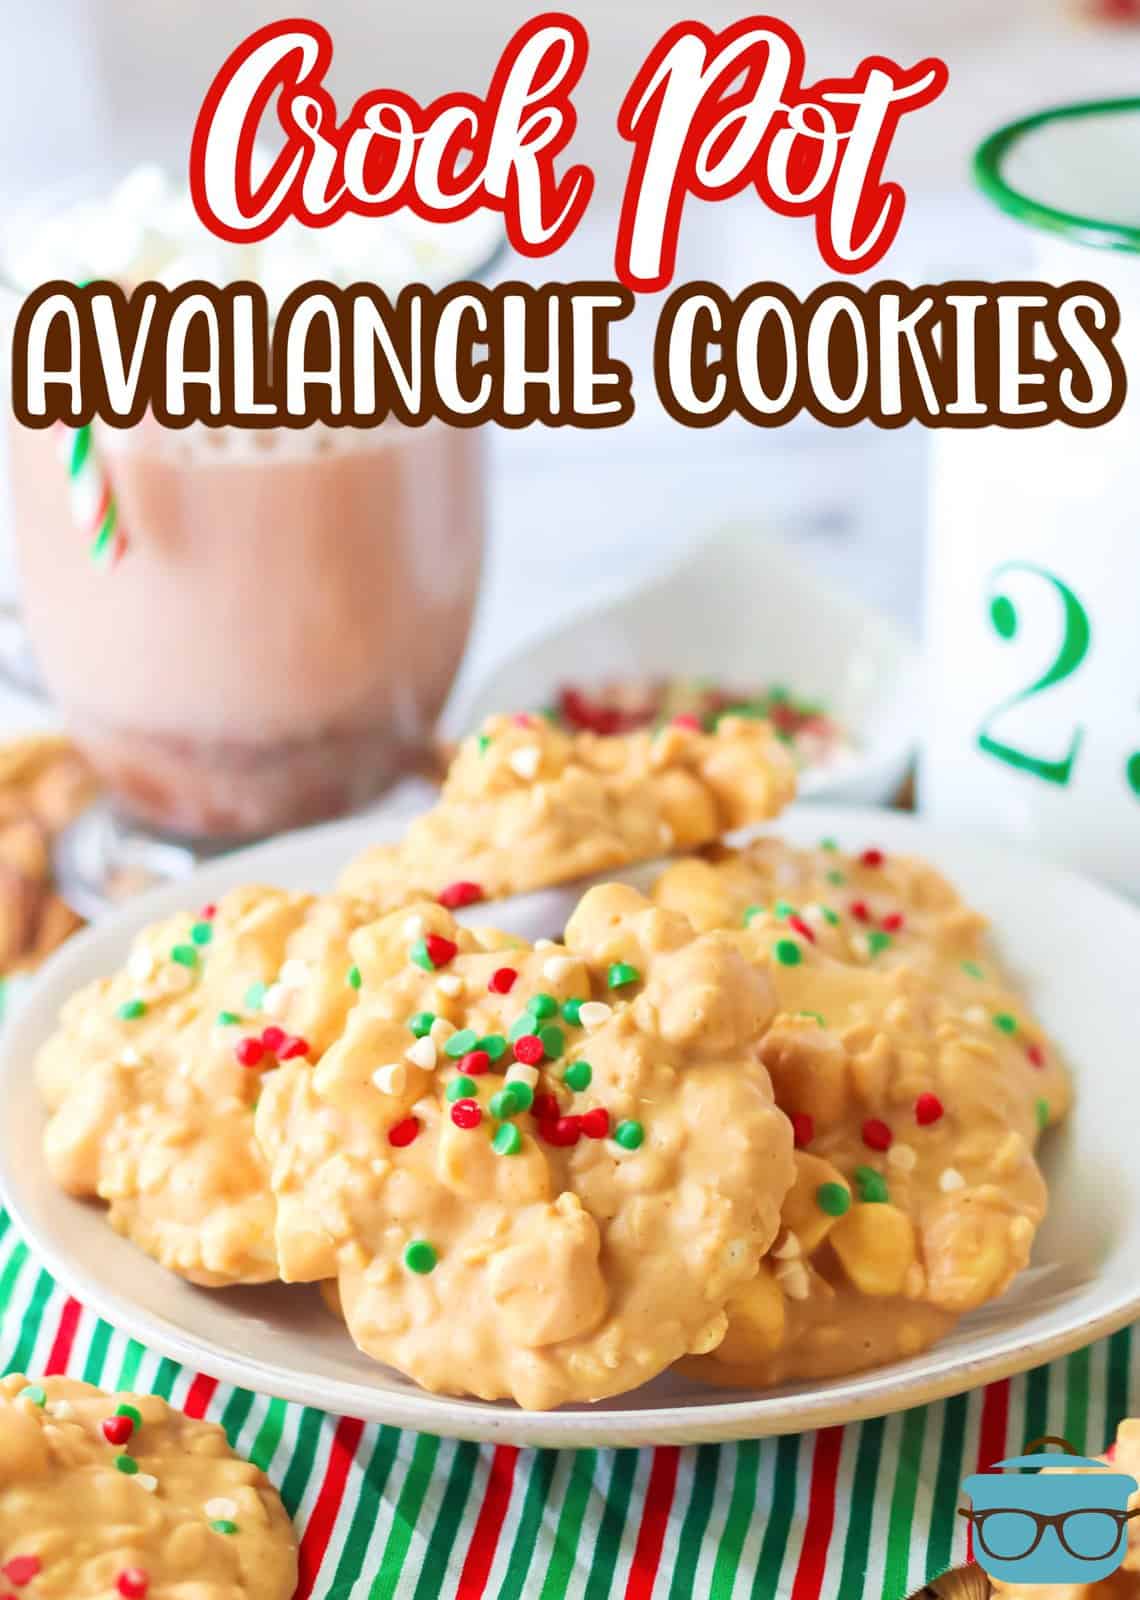 This photo show Crock Pot Avalanche Cookies served on a white plate. The cookies are topped with red, white and green candy sprinkles. 